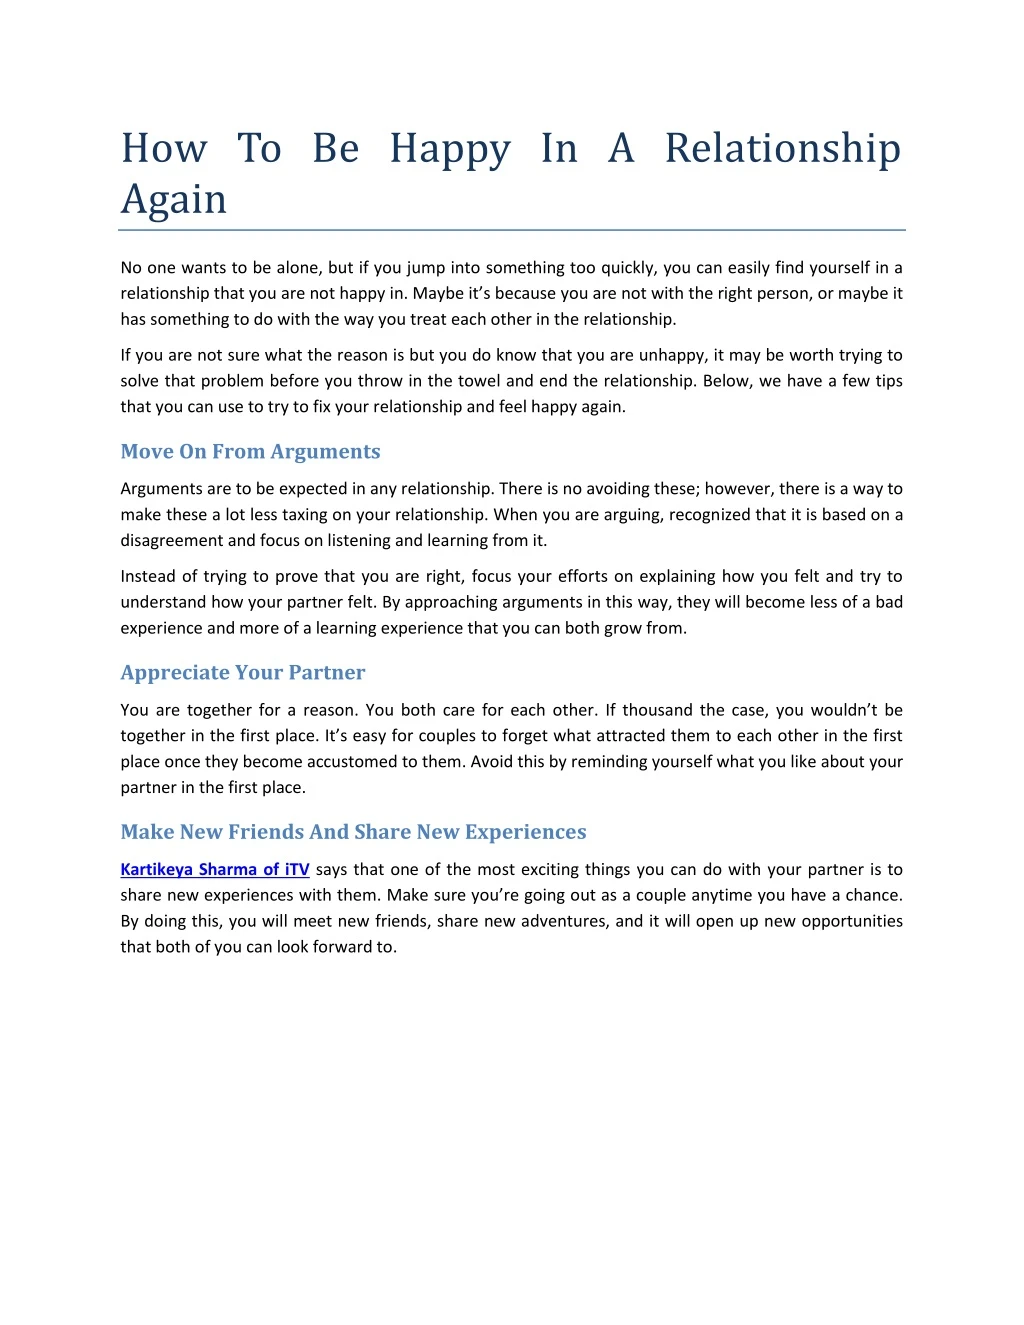 how to be happy in a relationship again